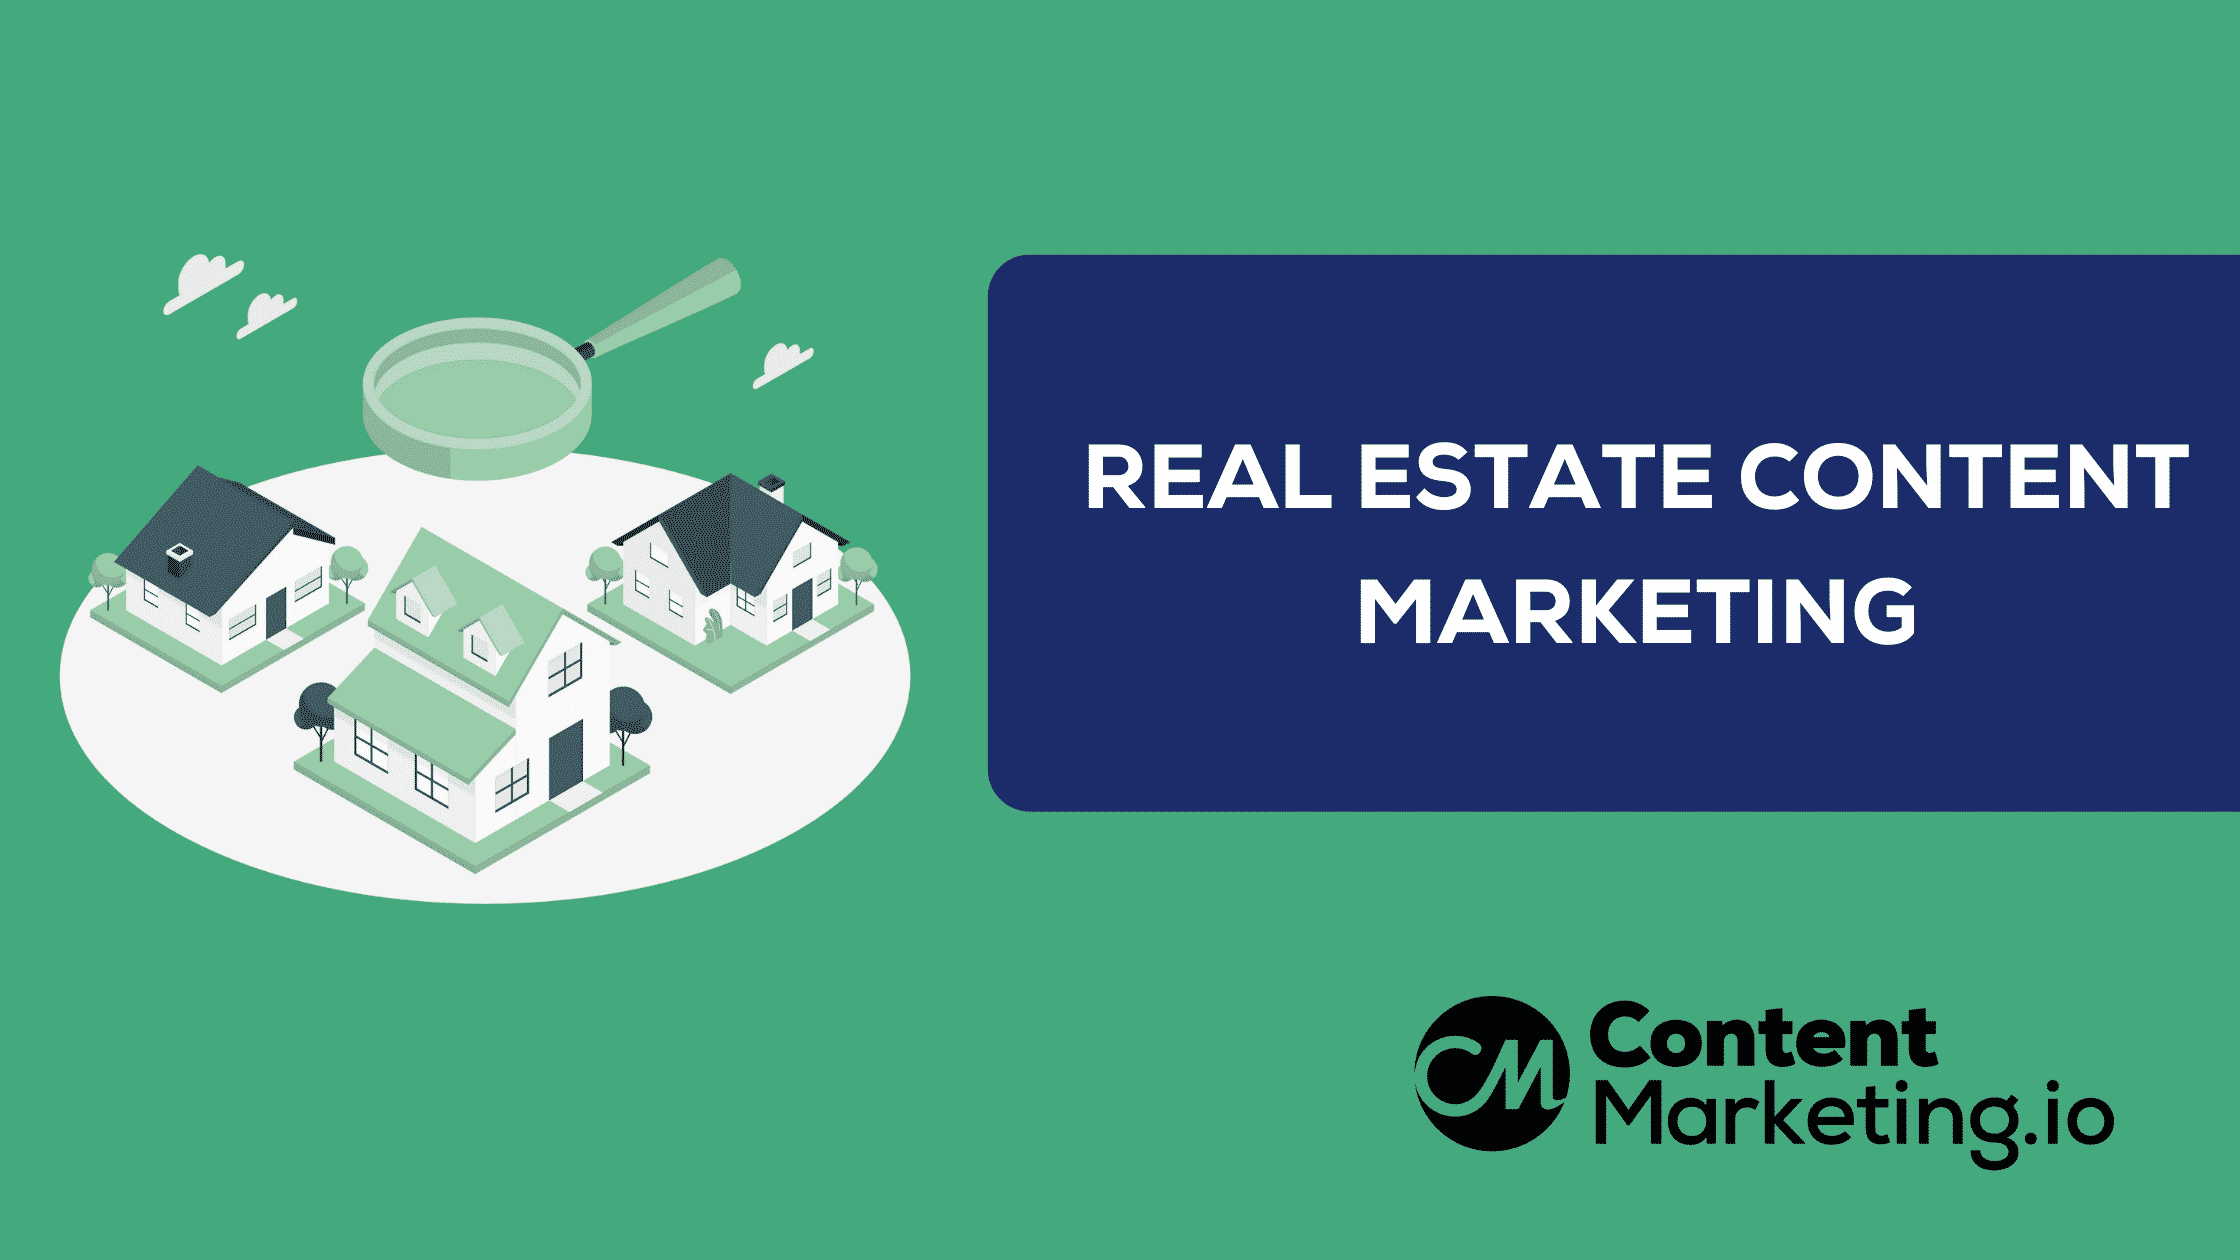 Real estate content marketing